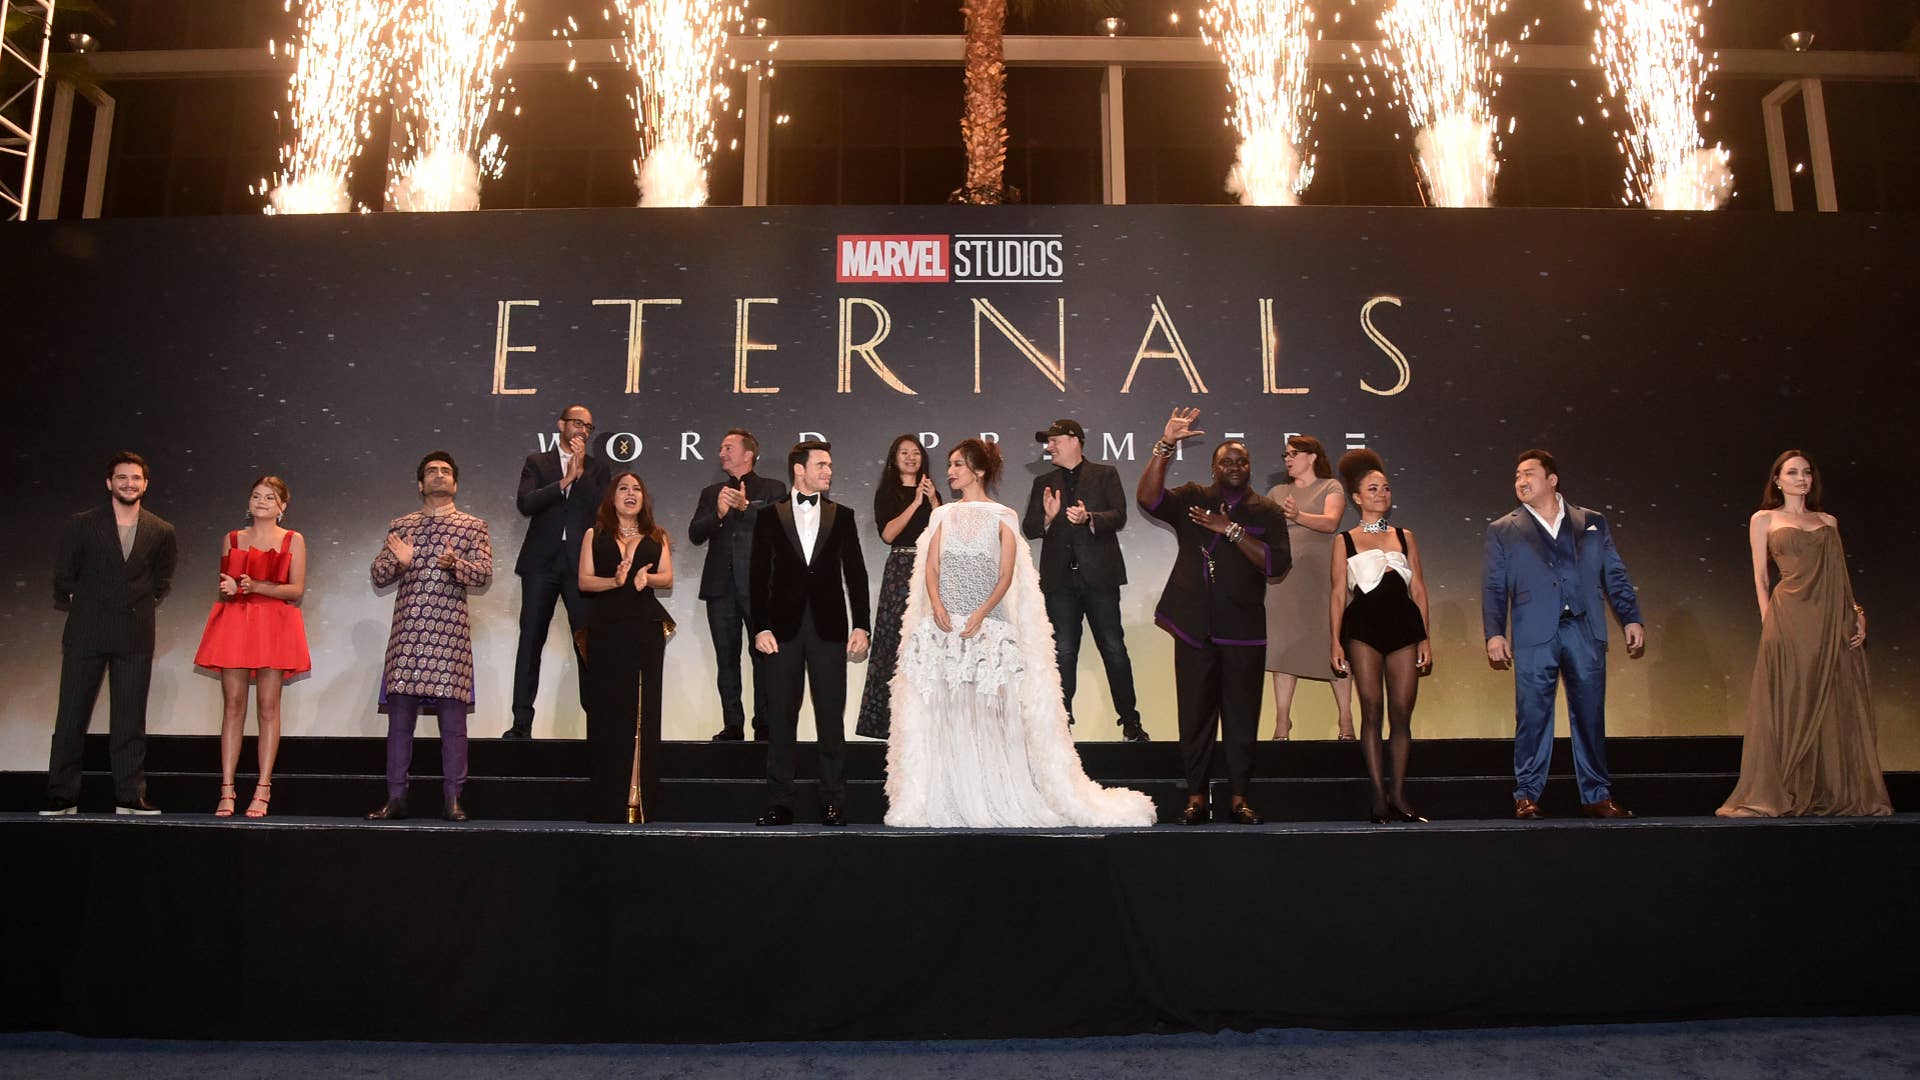 Marvel Studios' 'Eternals' cast and execs pose together at world premiere.